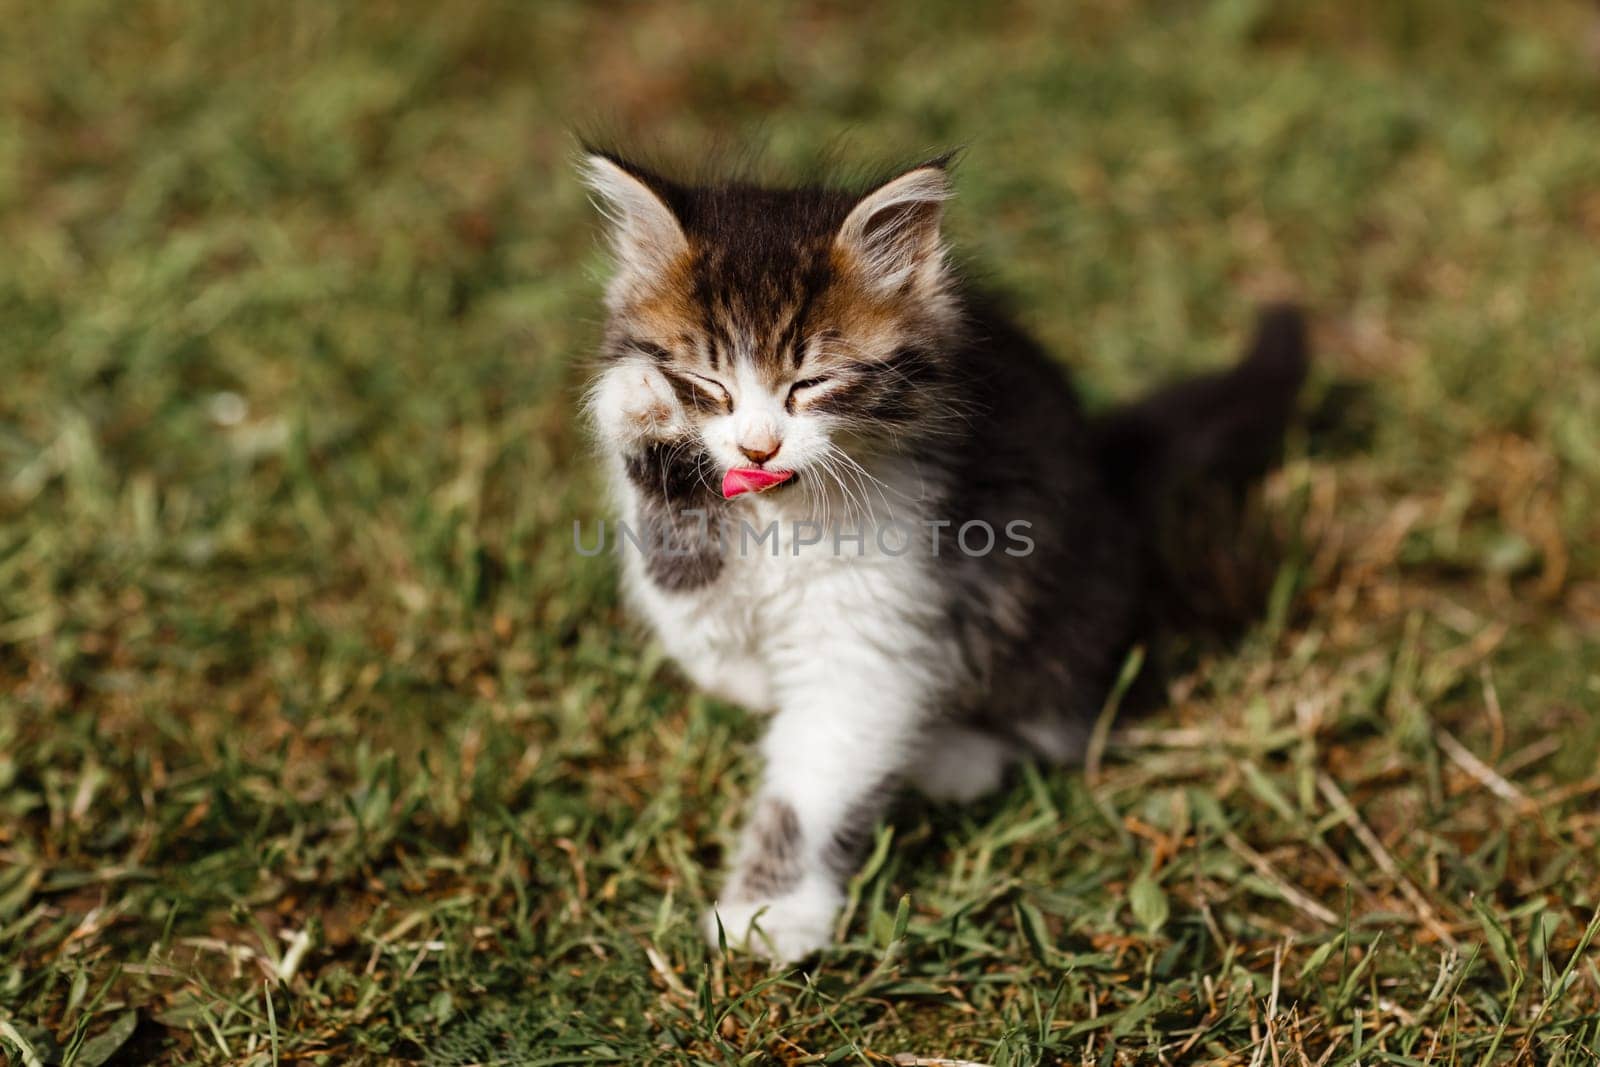 Little ripple Kitten washes his face on the grass in the garden. spring sunny day.